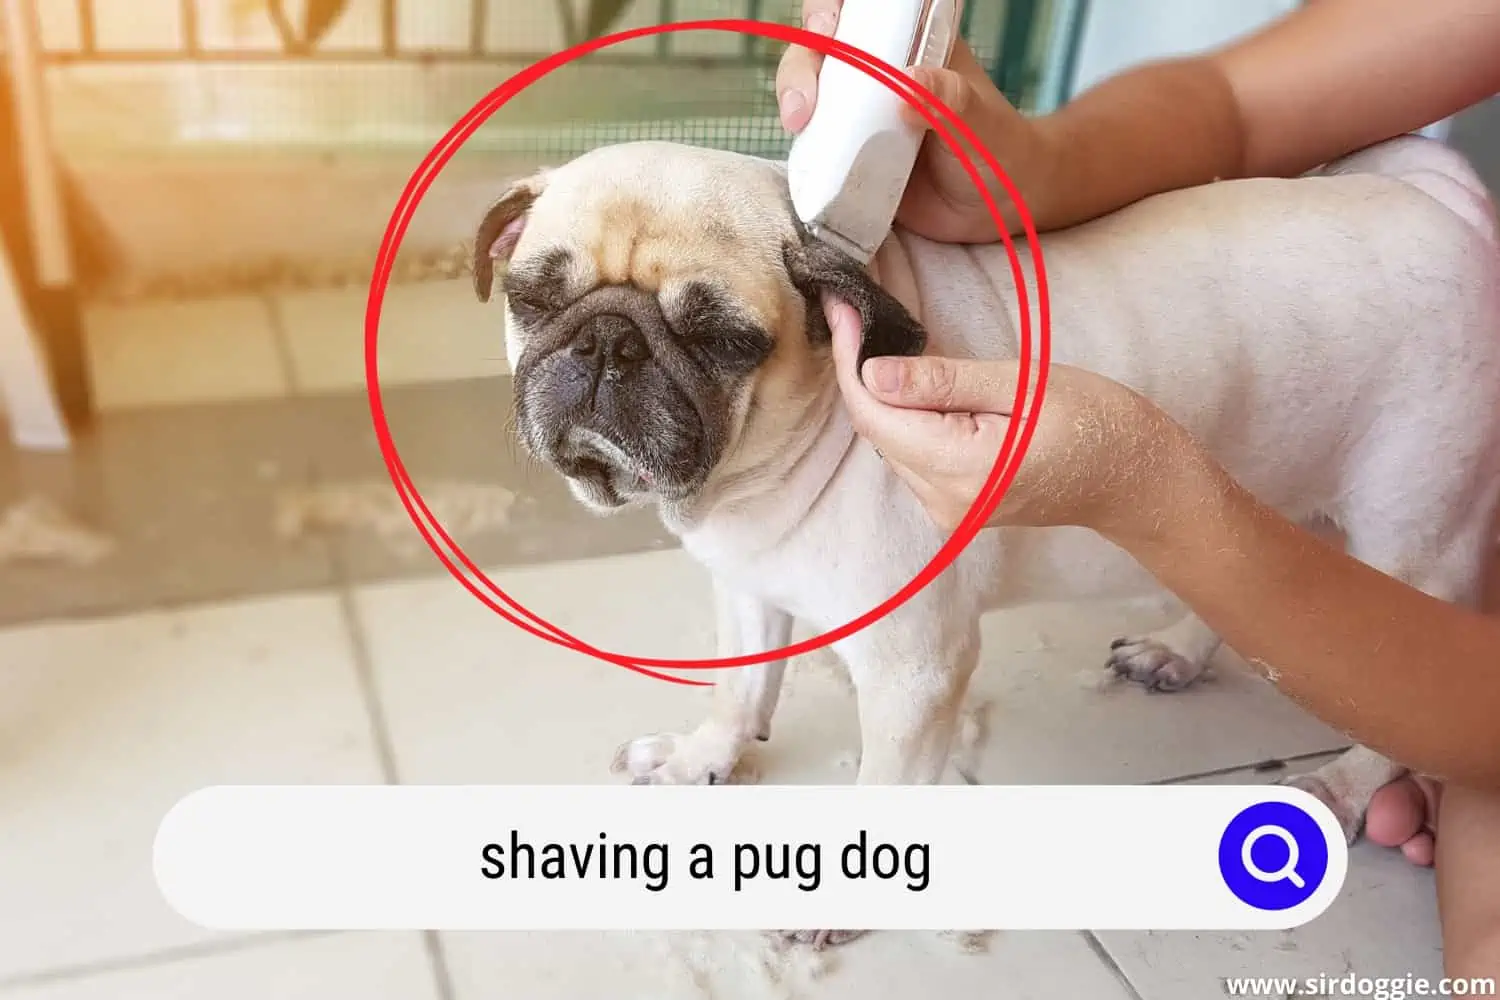 Pug getting groomed by shaving fur with owner outside home